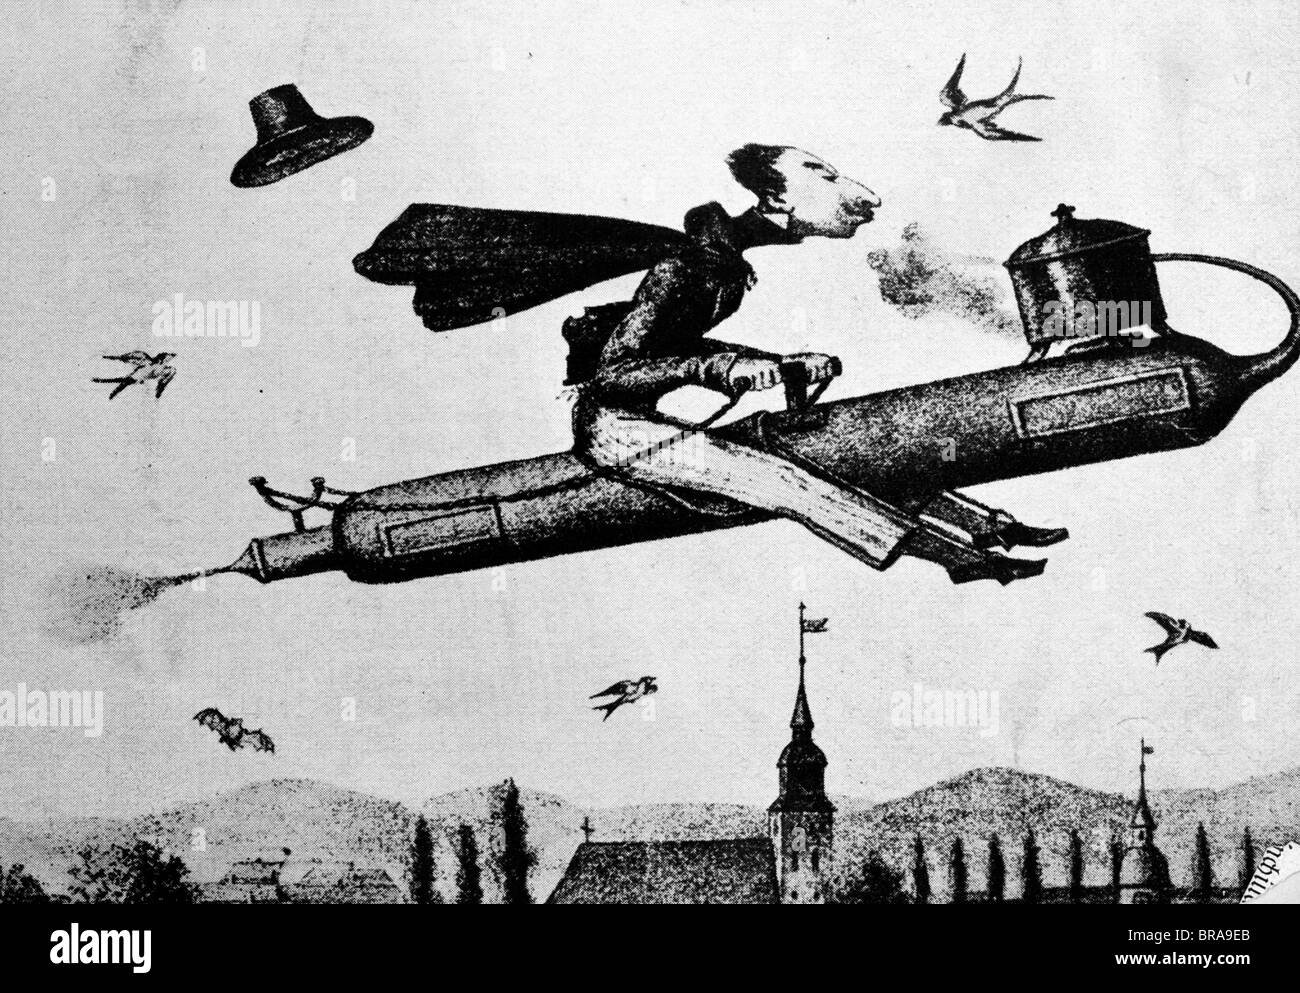 1800s ILLUSTRATION OF MAN RIDING A STEAM ROCKET IN THE SKY Stock Photo